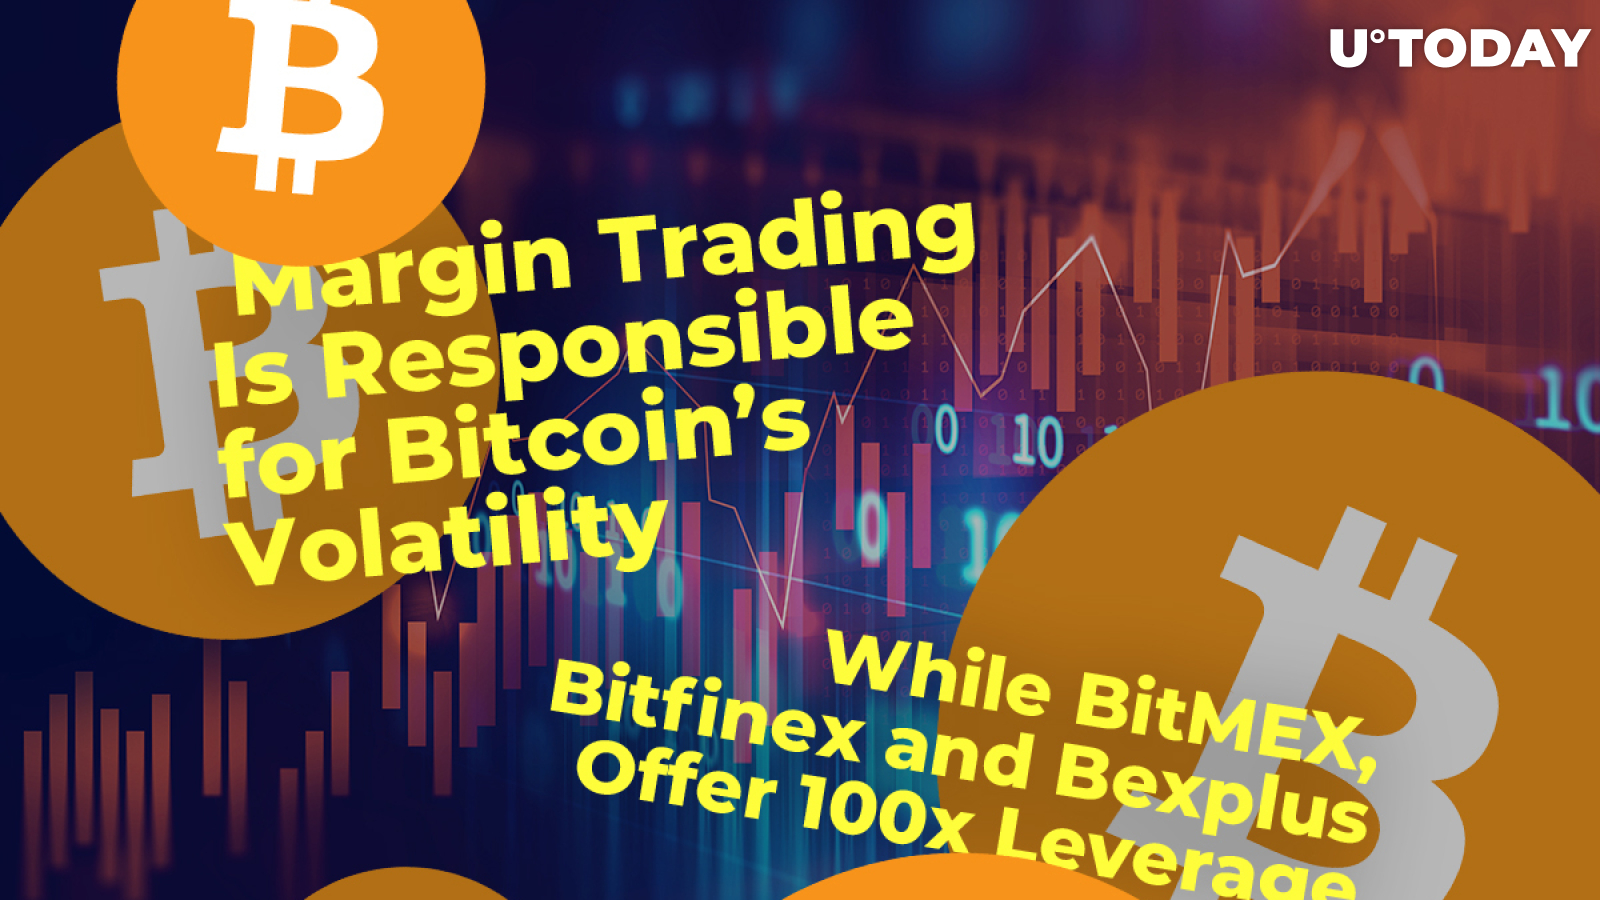 Brian Kelly Claims Margin Trading Is Responsible for Bitcoin’s Volatility While BitMEX, Bitfinex, and Bexplus Offer 100x Leverage